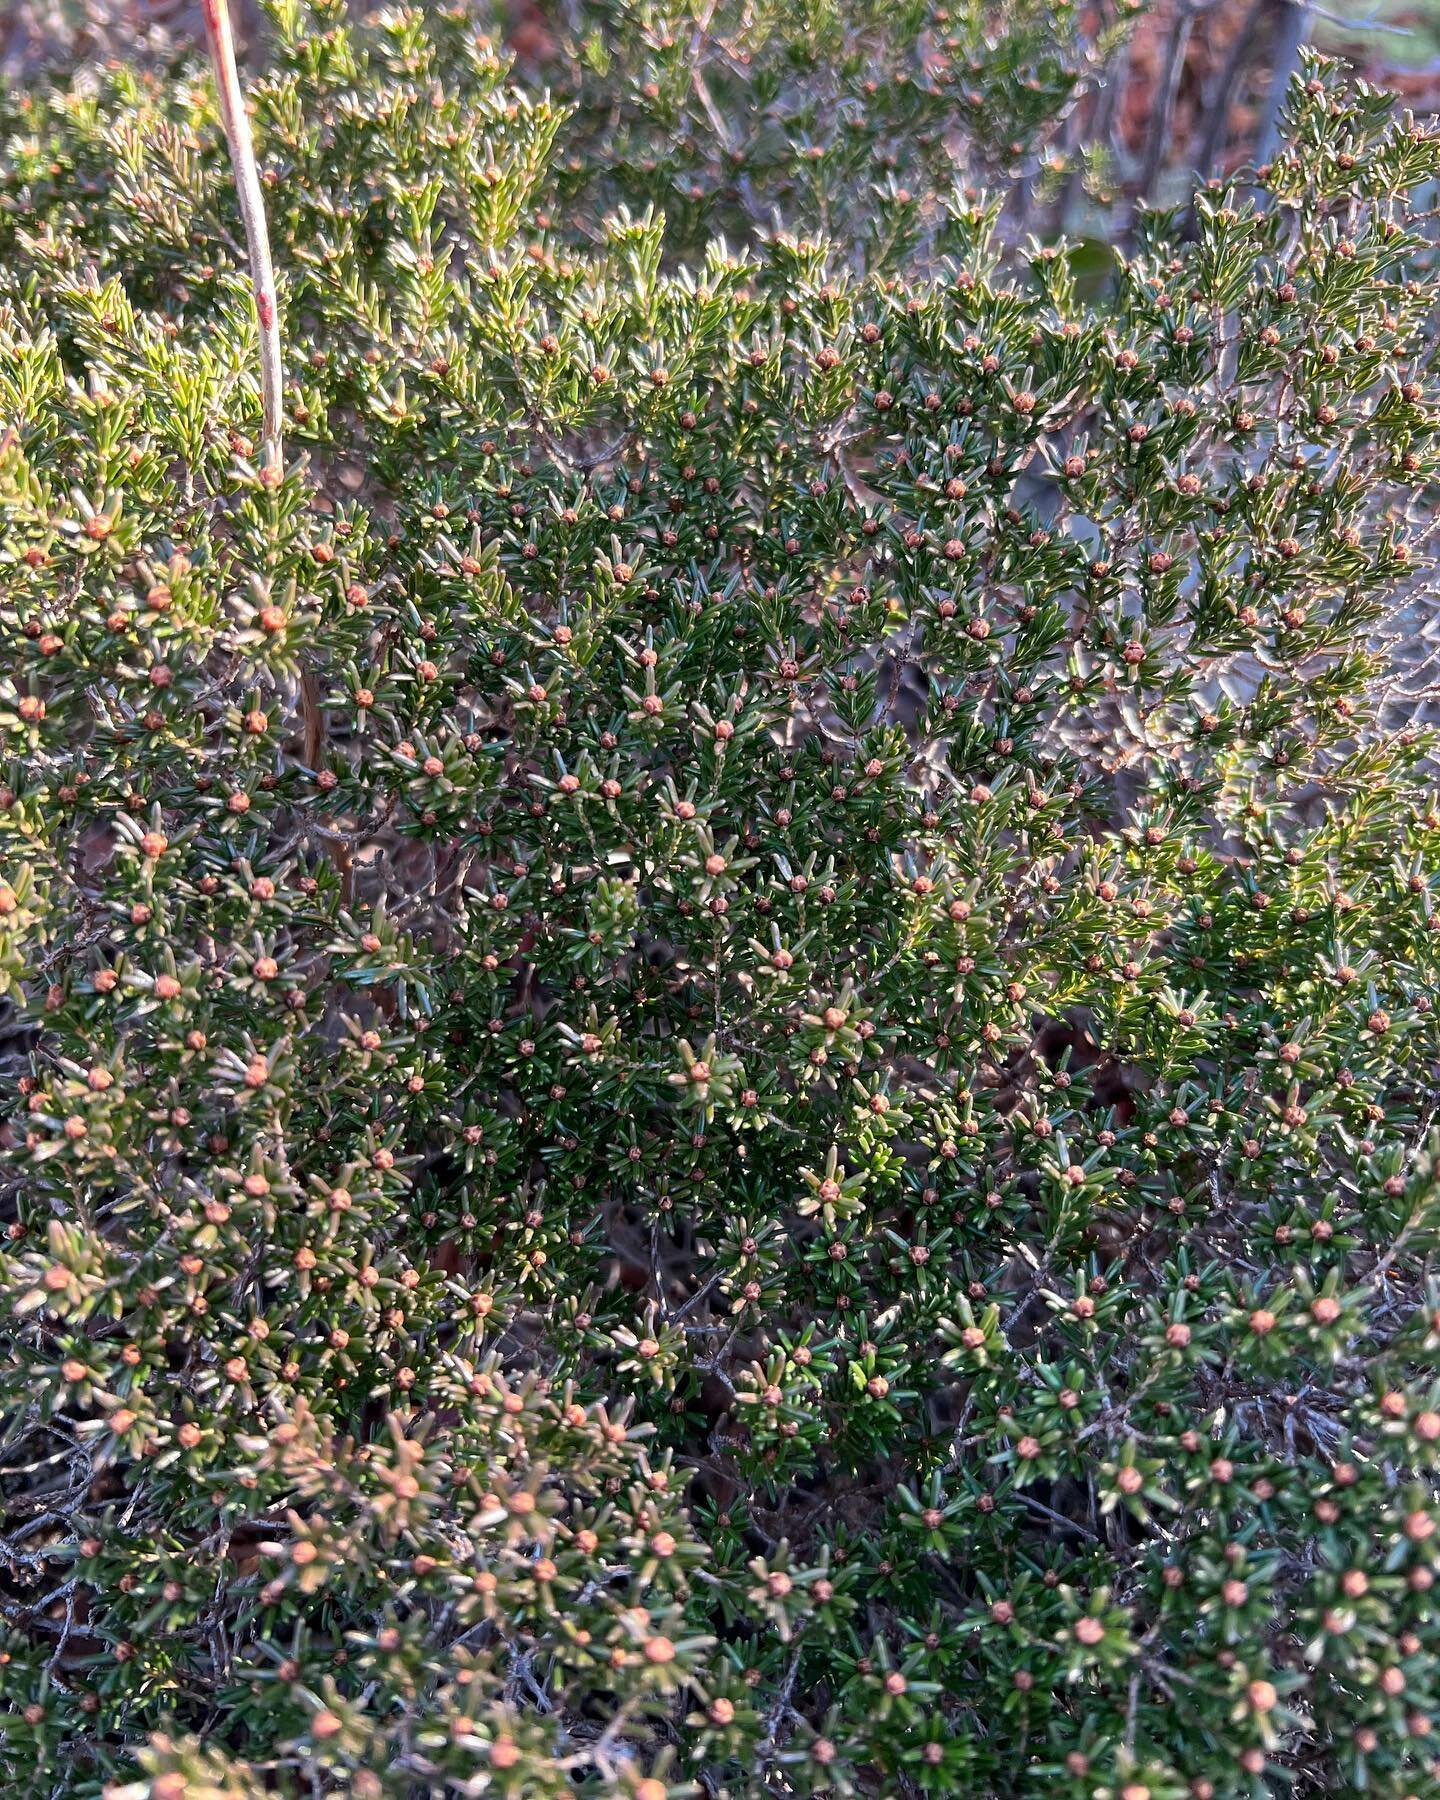 Did you know that there's a population of Broom crowberry (Corema conradii) on Gertrude's Nose near Lake Minnewaska? A very rare, low growing evergreen species, this is the only known population outside of the coastal plain, and the only known popula